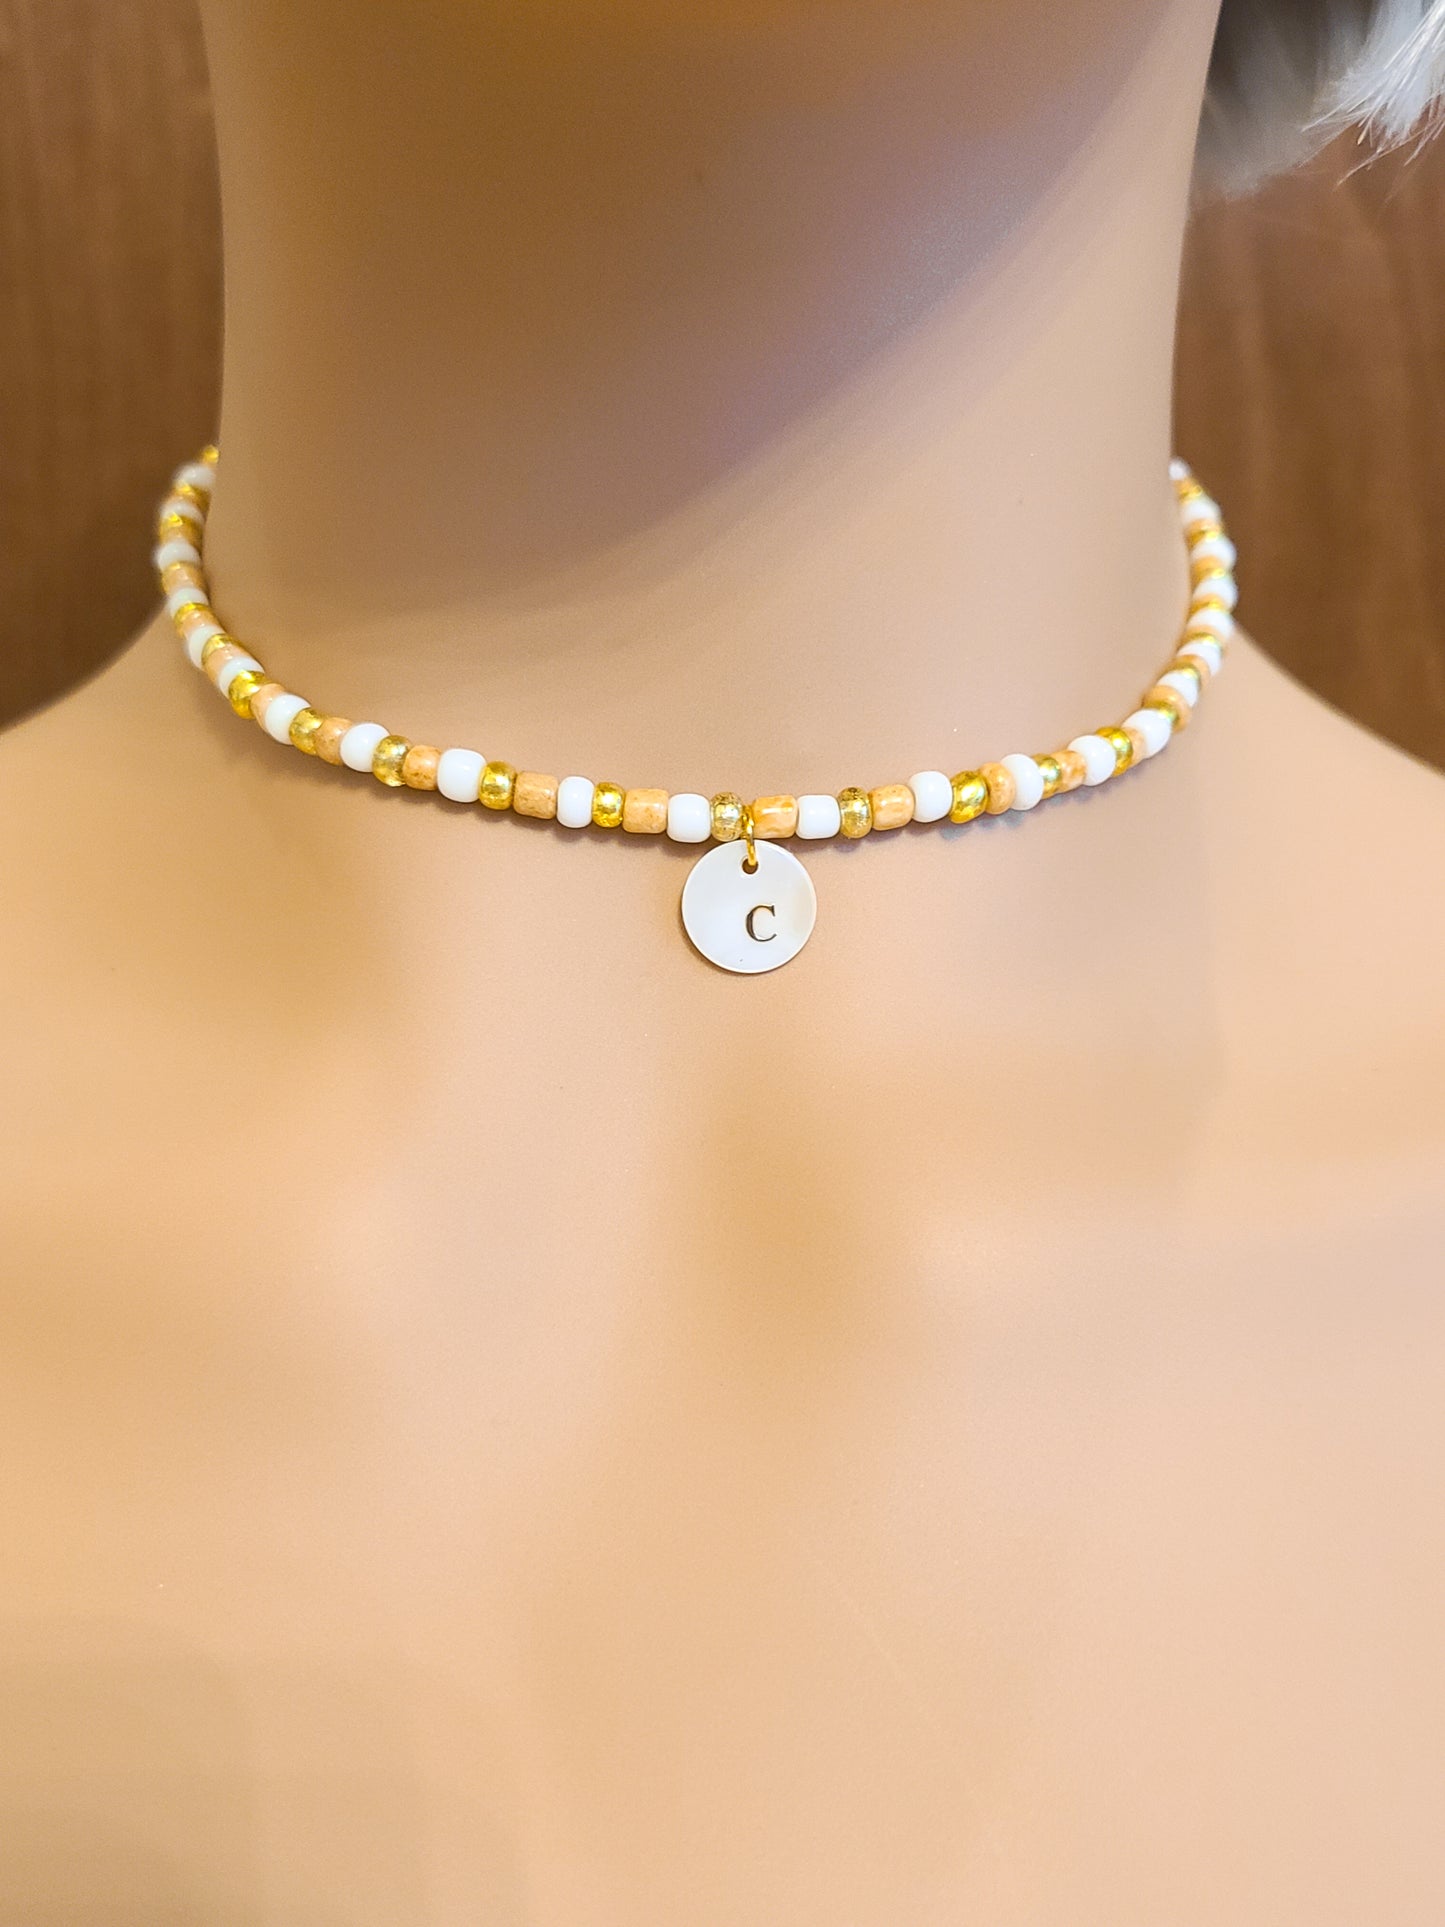 Custom Personalized Gold Initial Seed Bead Choker Necklace